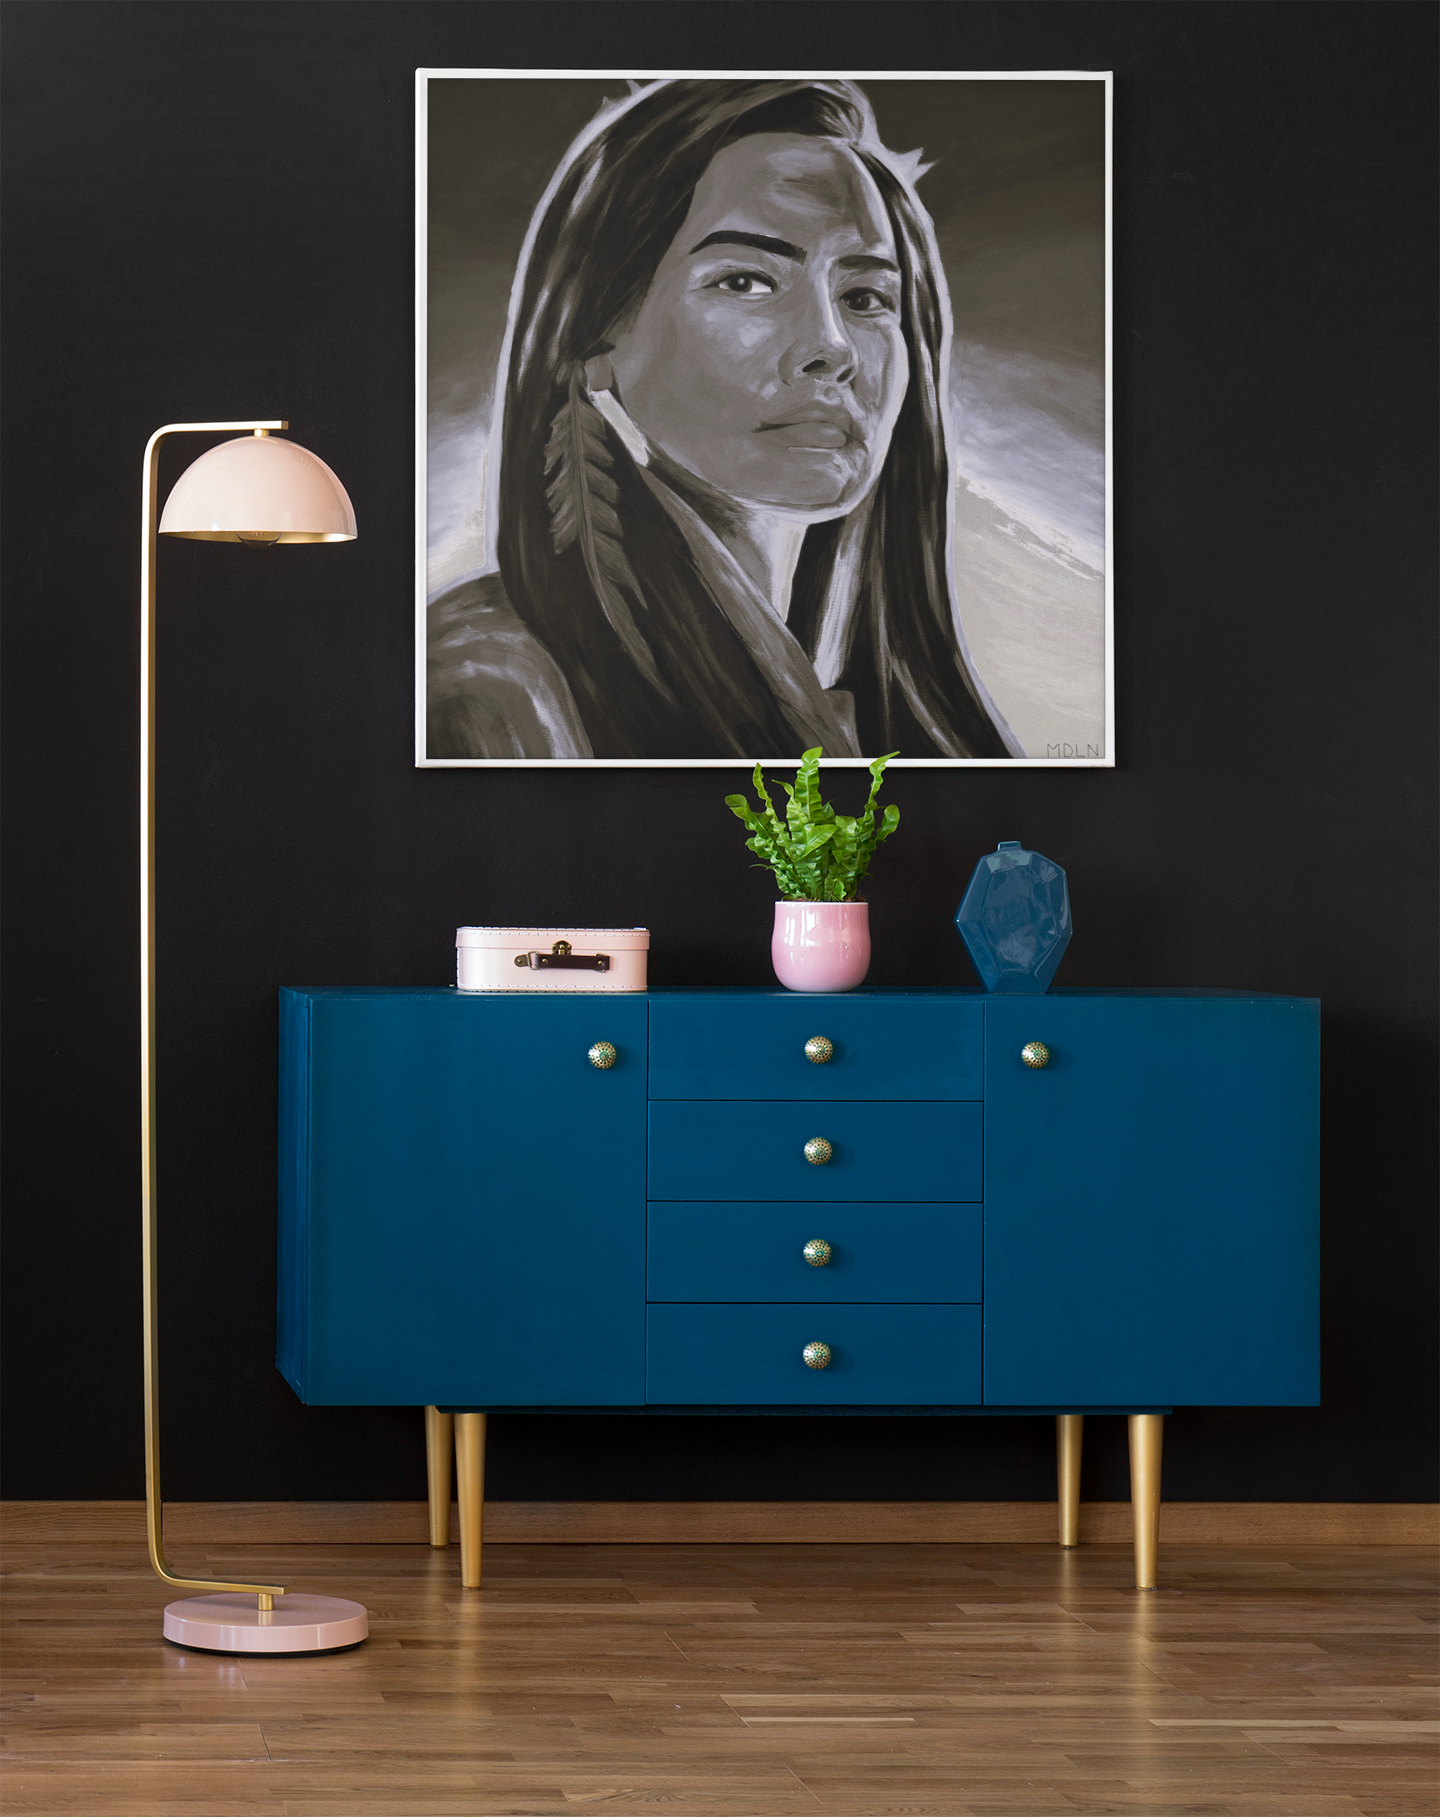 Black and white Indigenous art print on canvas of an Aboriginal Woman with feather earring, hanging the wall over a console table next to a lamp